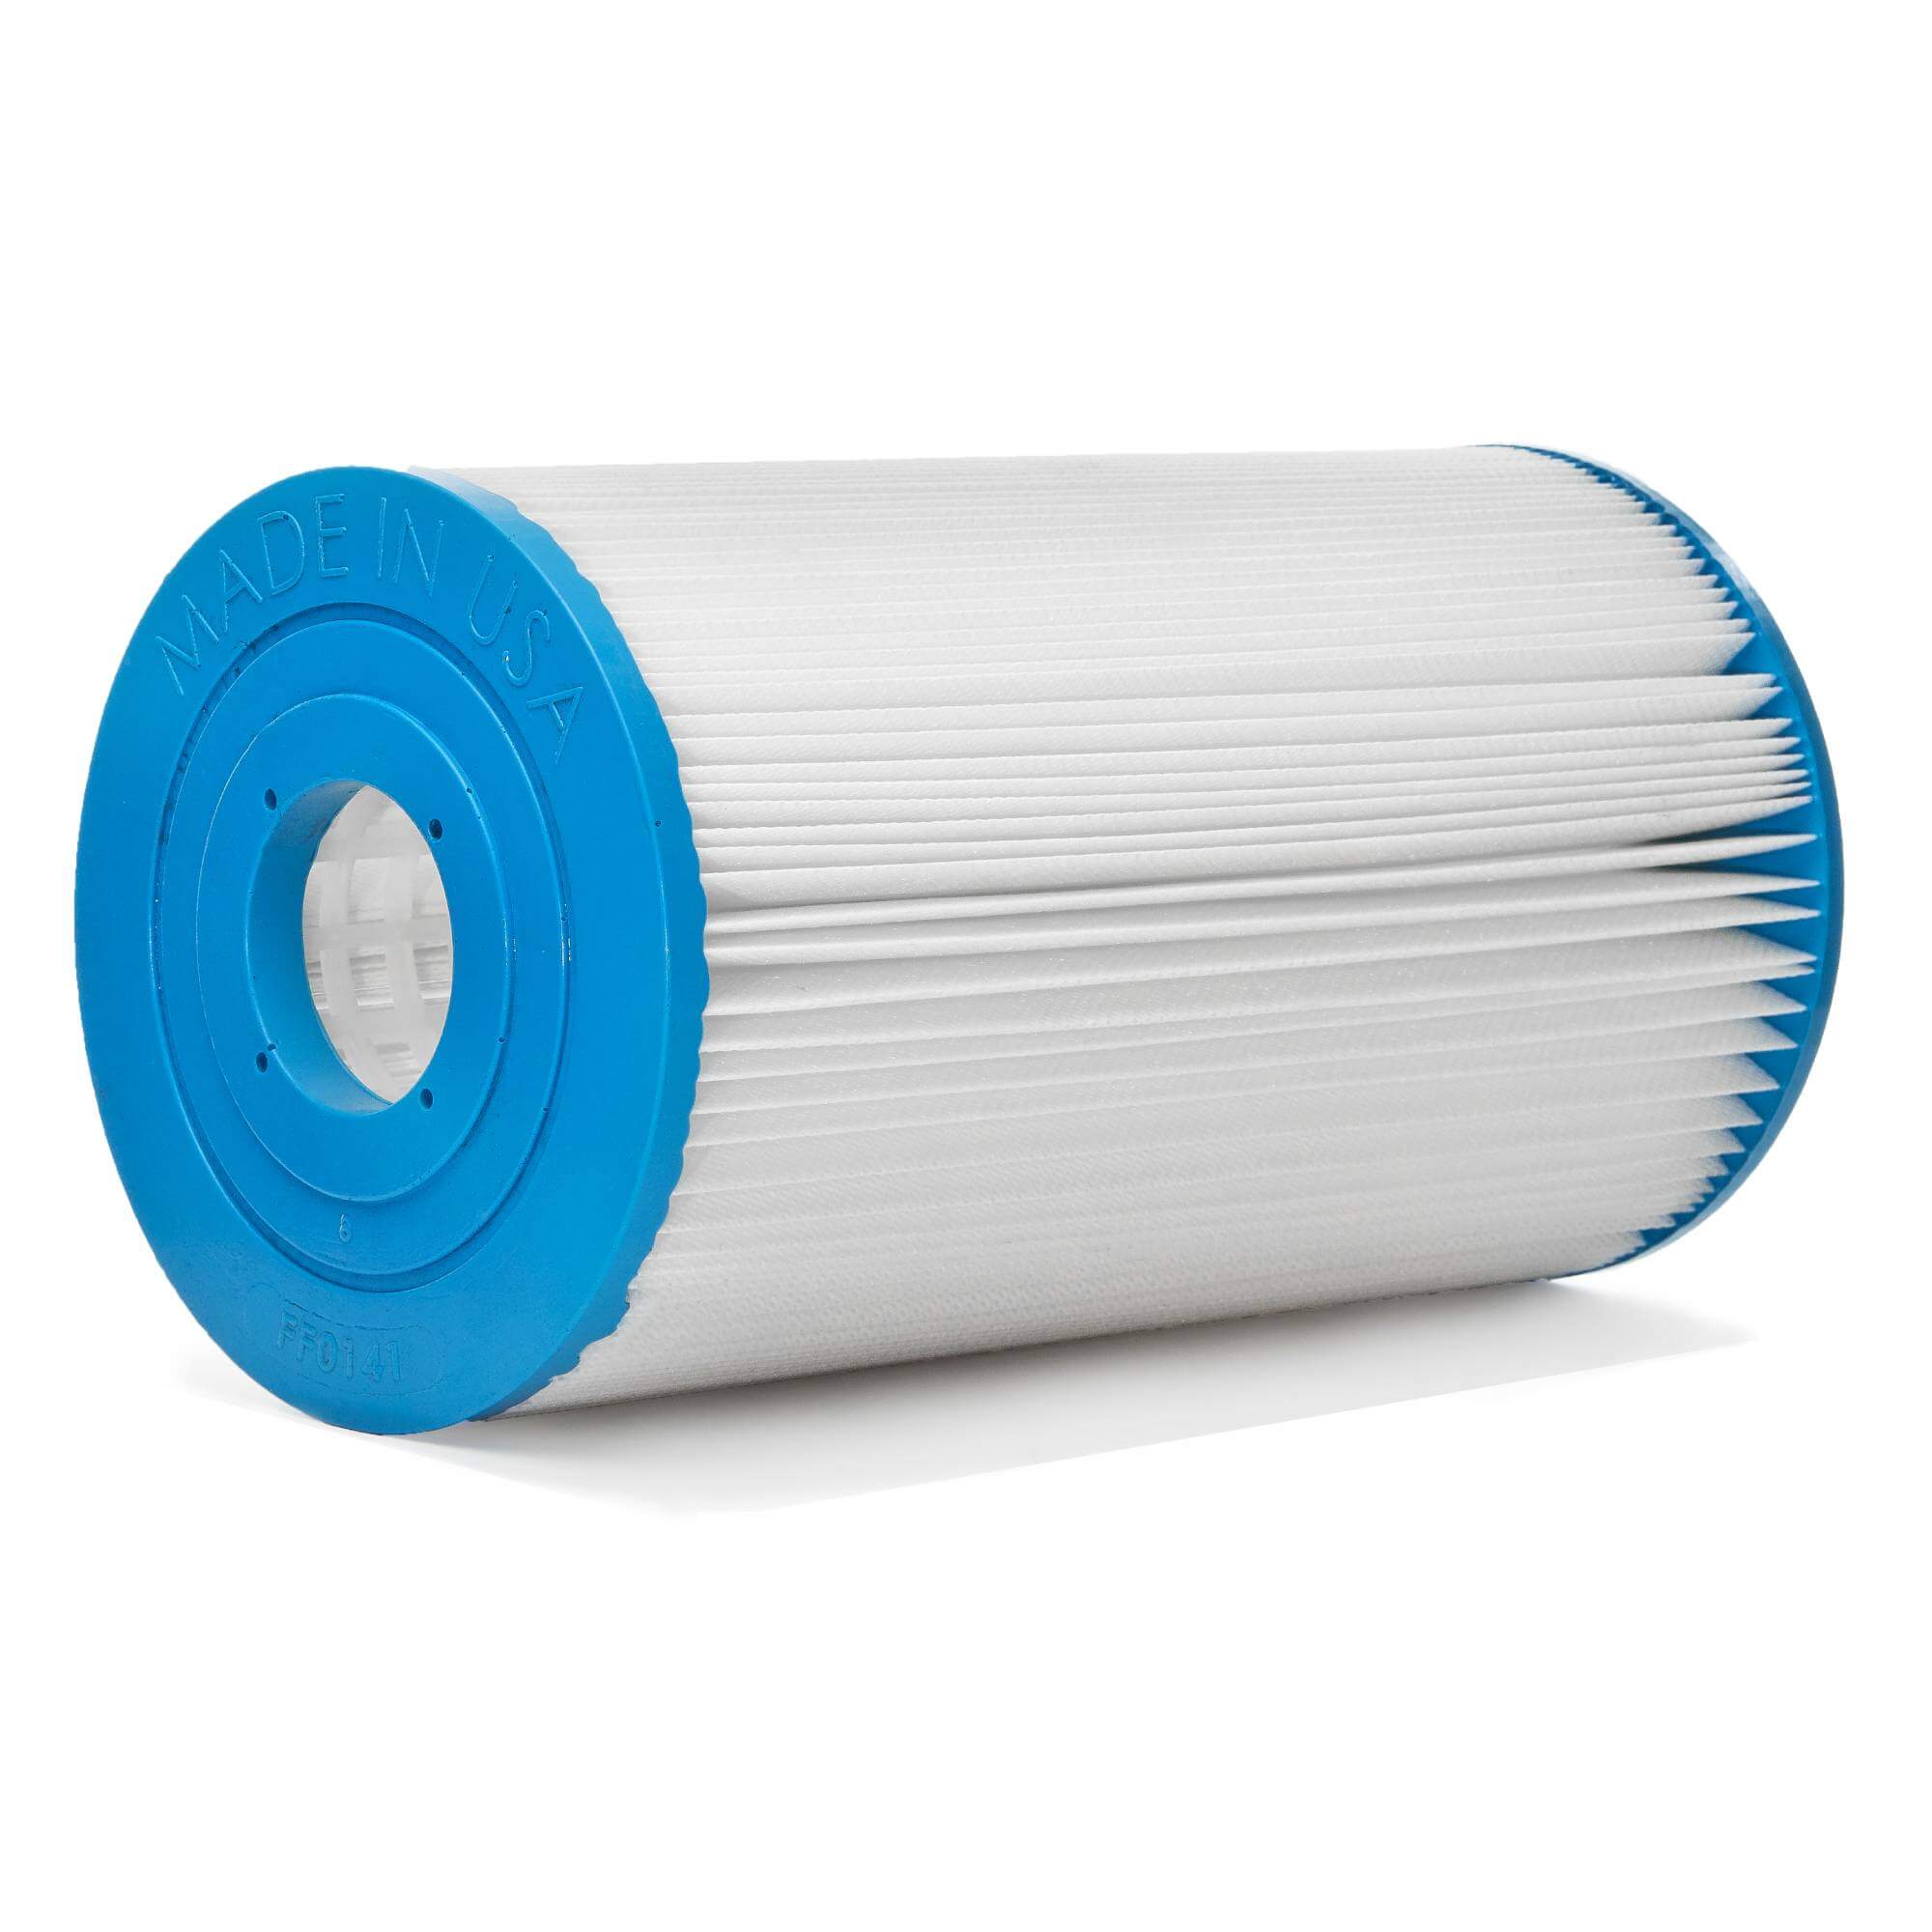 Filters Fast&reg; FF-0141 Replacement For Pleatco PWK30